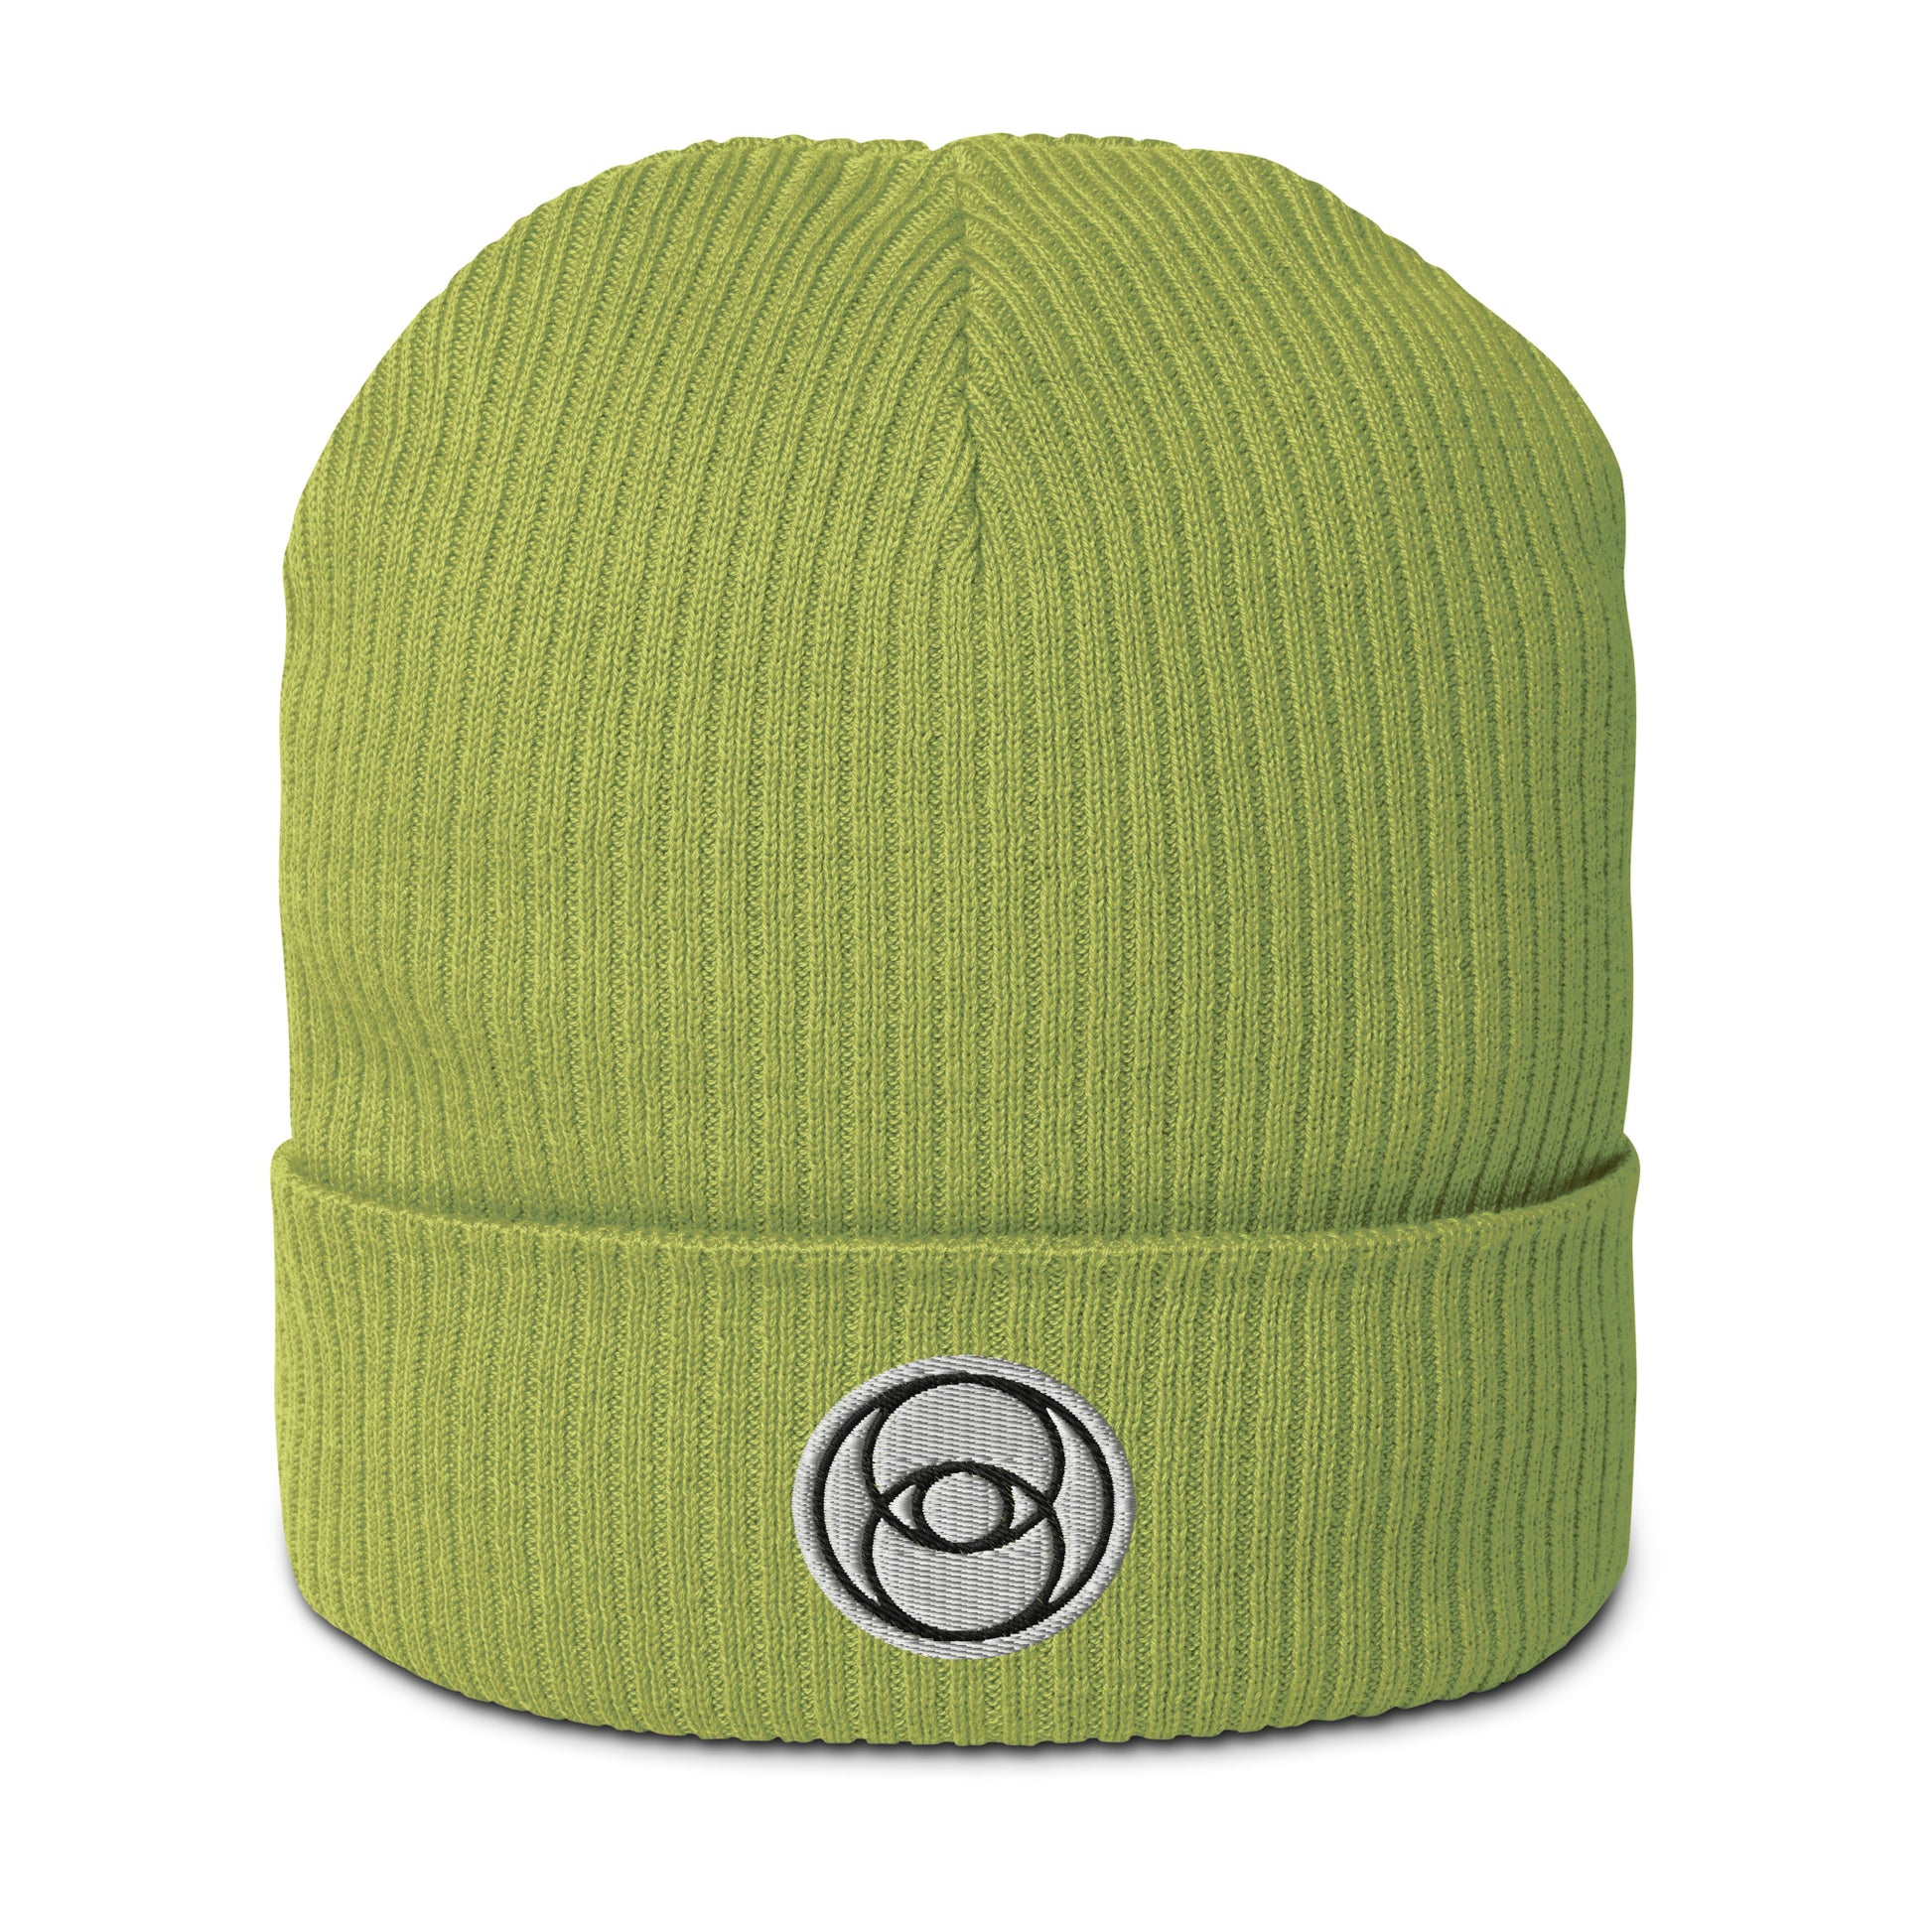 The Vesica Piscis Organic Cotton Beanie in Apple Green is all about harmonious unions. Made of organic cotton and featuring a Vesica Piscis embroidery, this piece is something special. The Vesica Piscis symbolizes unity, balance, and connecting with the universe. Our beanies are made with breathable, lightweight fabric and natural materials, so you can stay comfy while you're exploring the mysteries of existence. Grab one of these beanies and add a touch of divinity to your style.